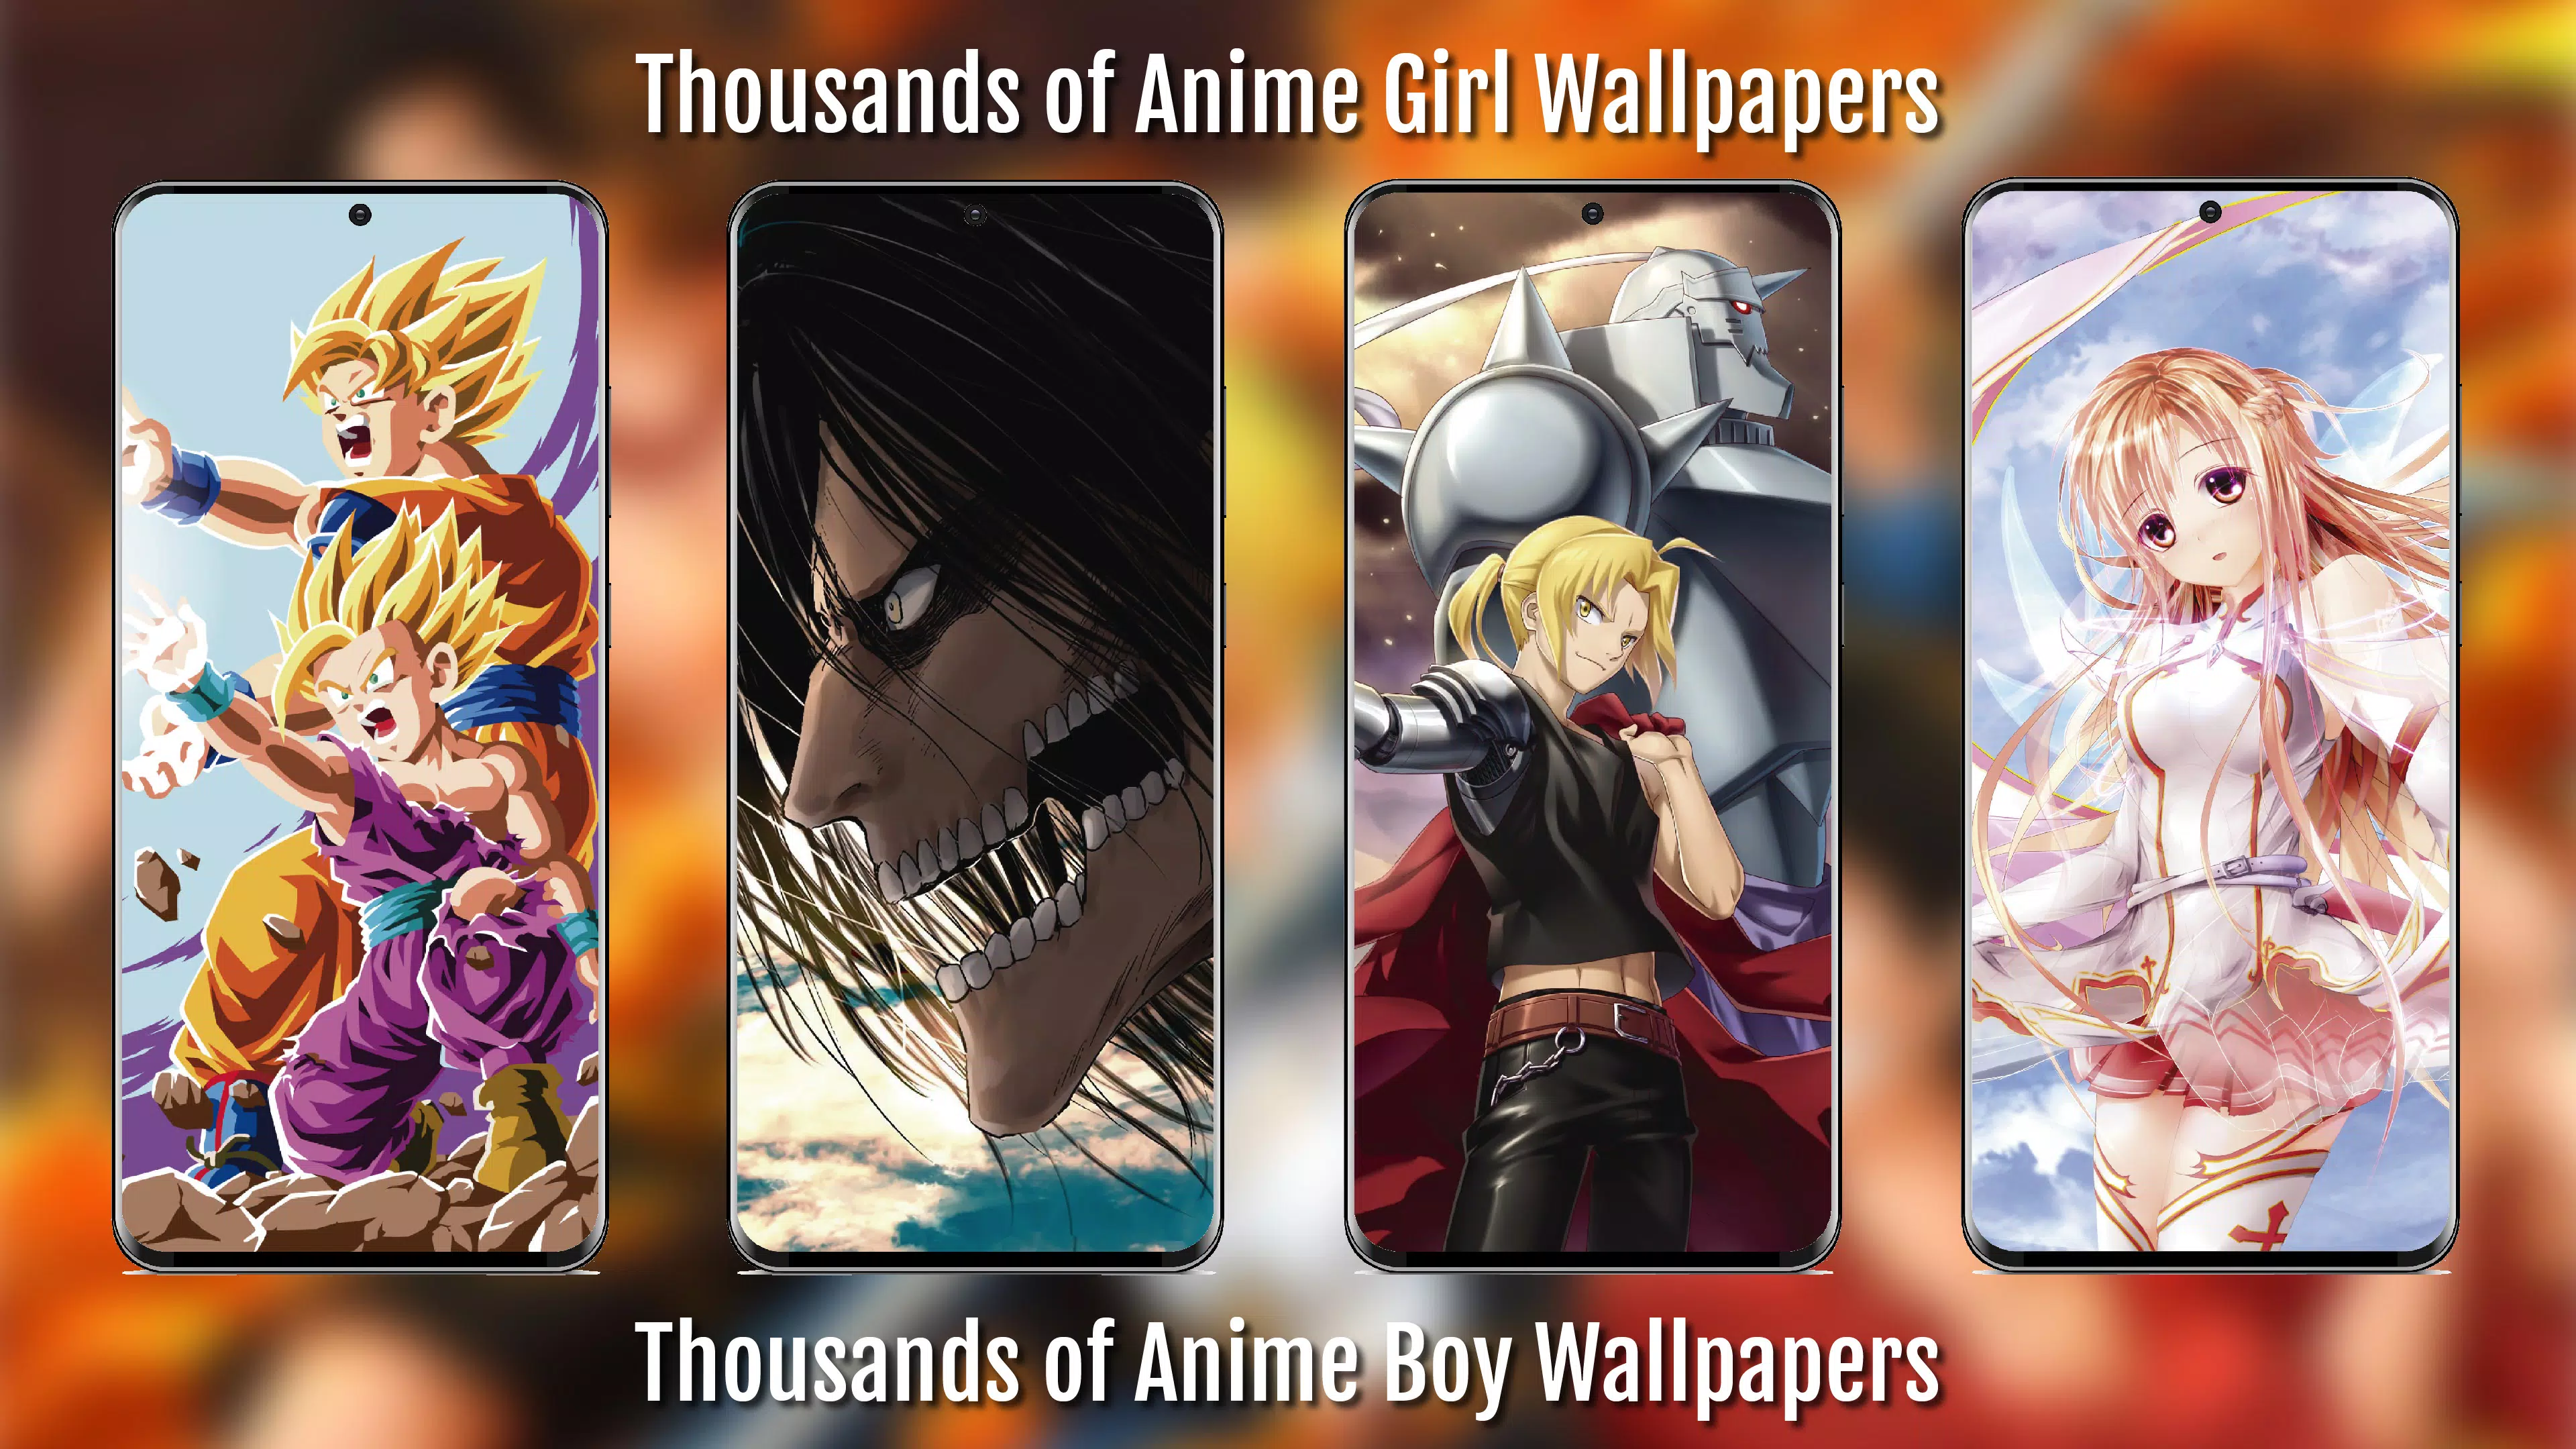 Anime 4K Wallpapers::Appstore for Android